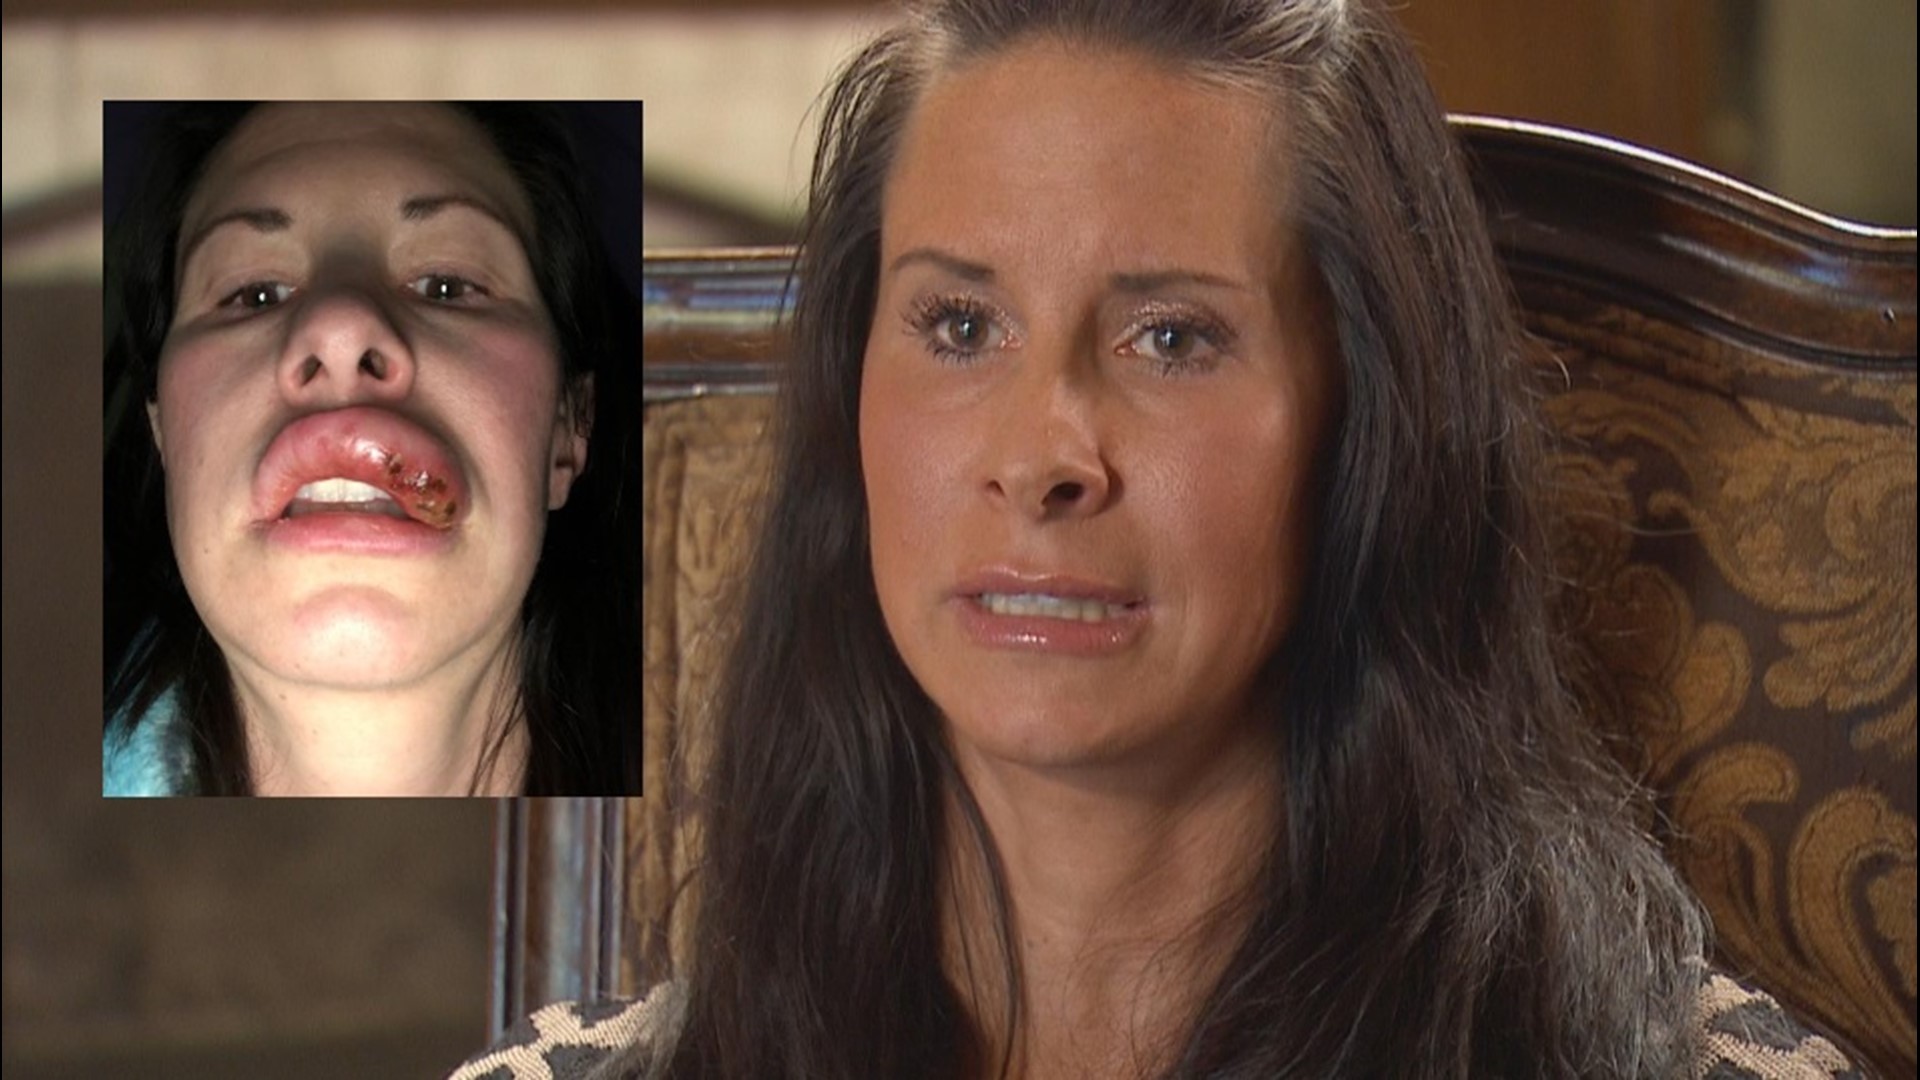 Tancy Nelson, 40, received a lip augmentation last year and learned she should have done her homework before the medical procedure.